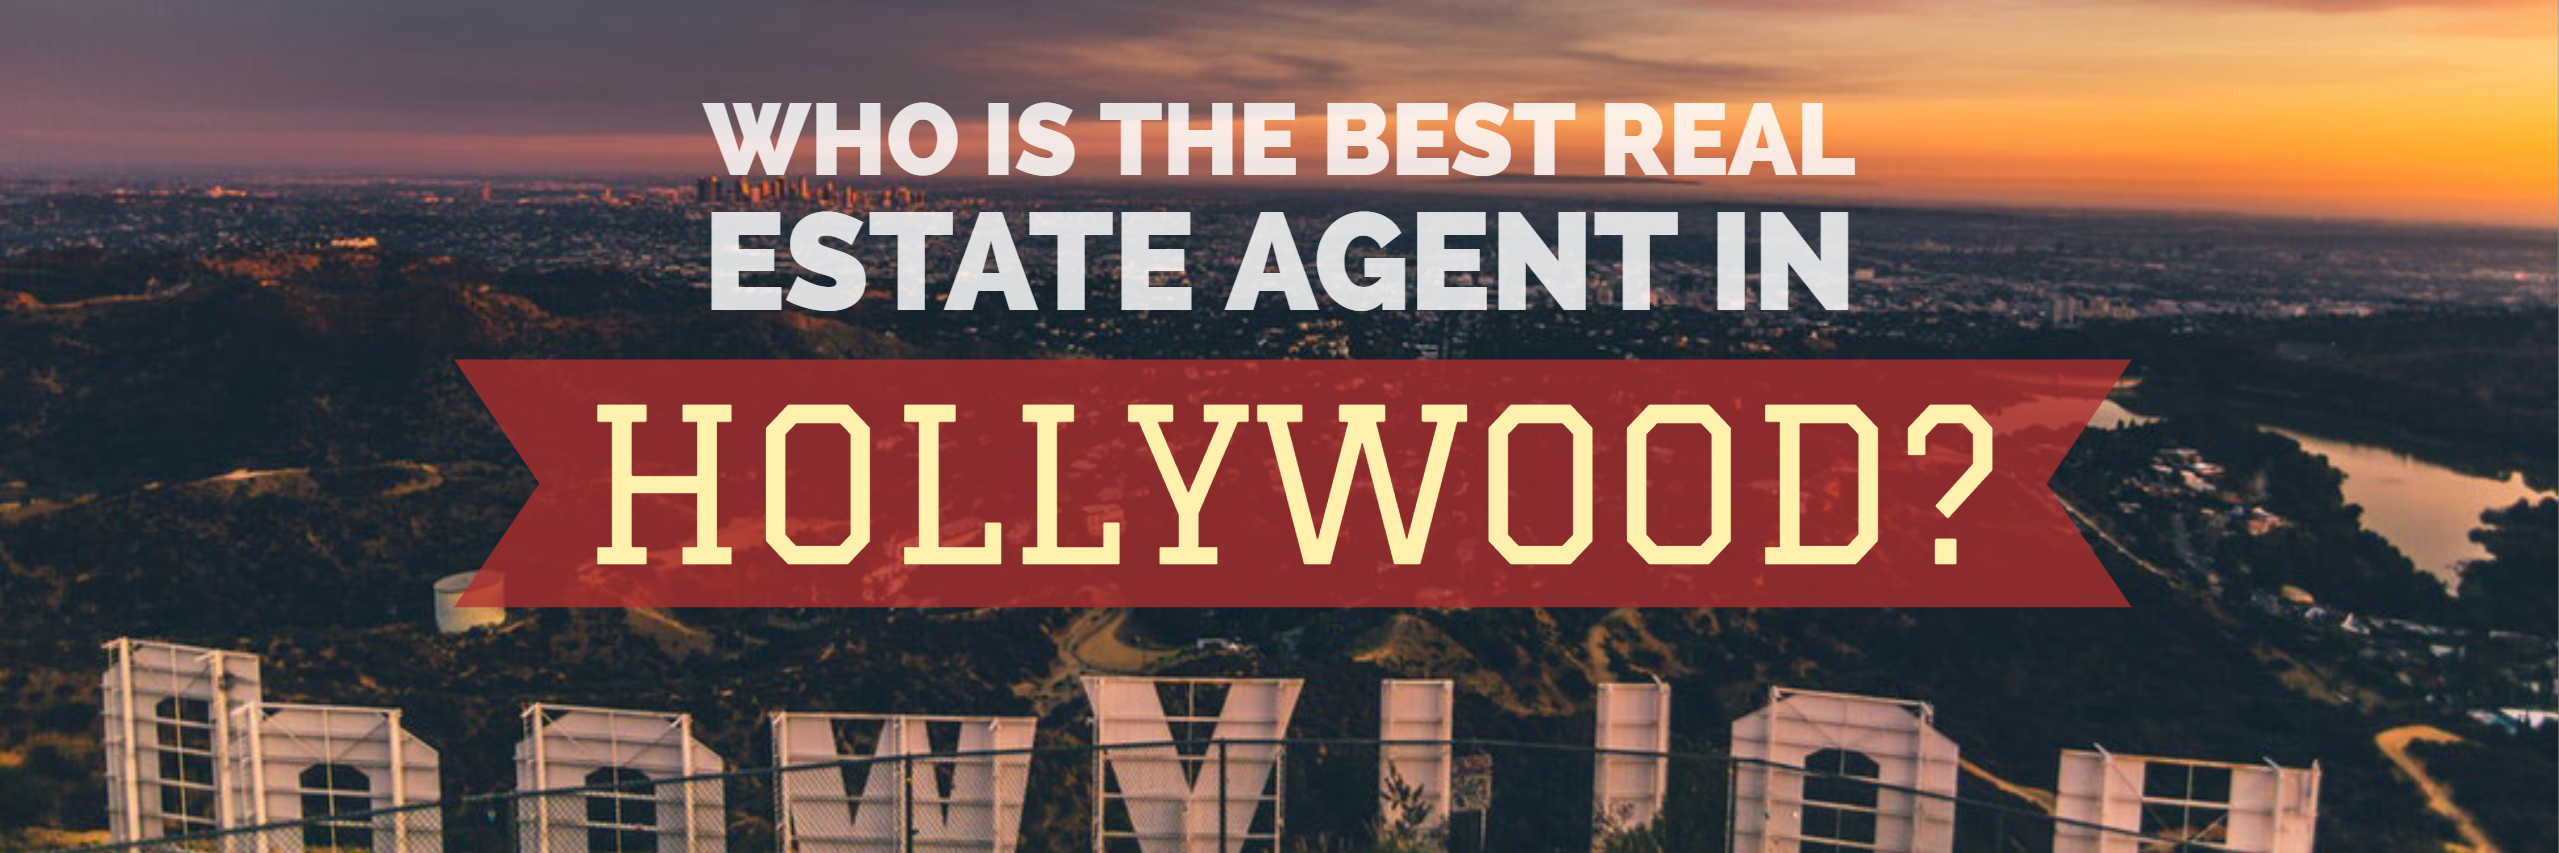 best real estate agent in hollywood best realtor homes for sale in hollywood sell my home in hollywood paul argueta